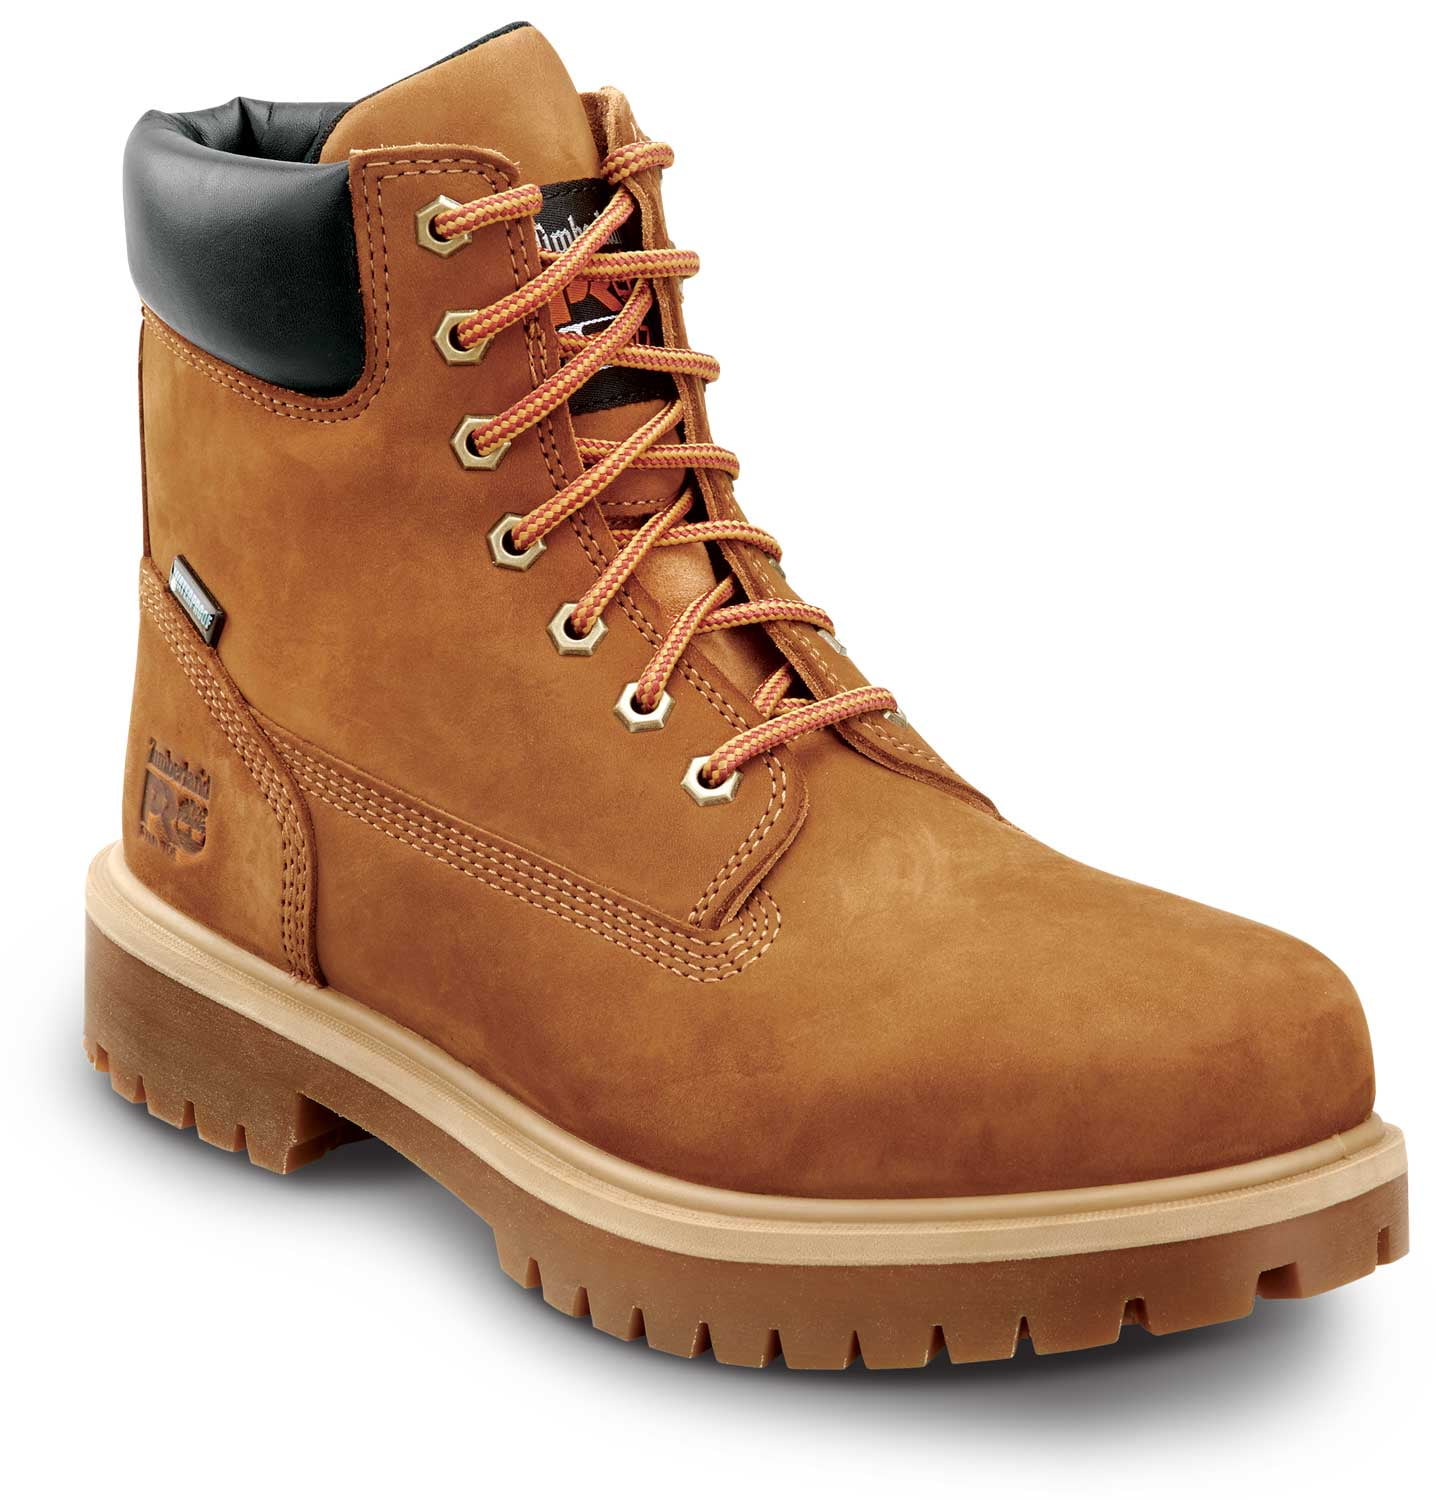 Timberland PRO 6IN Direct Attach Men's, Wheat, Steel Toe, EH